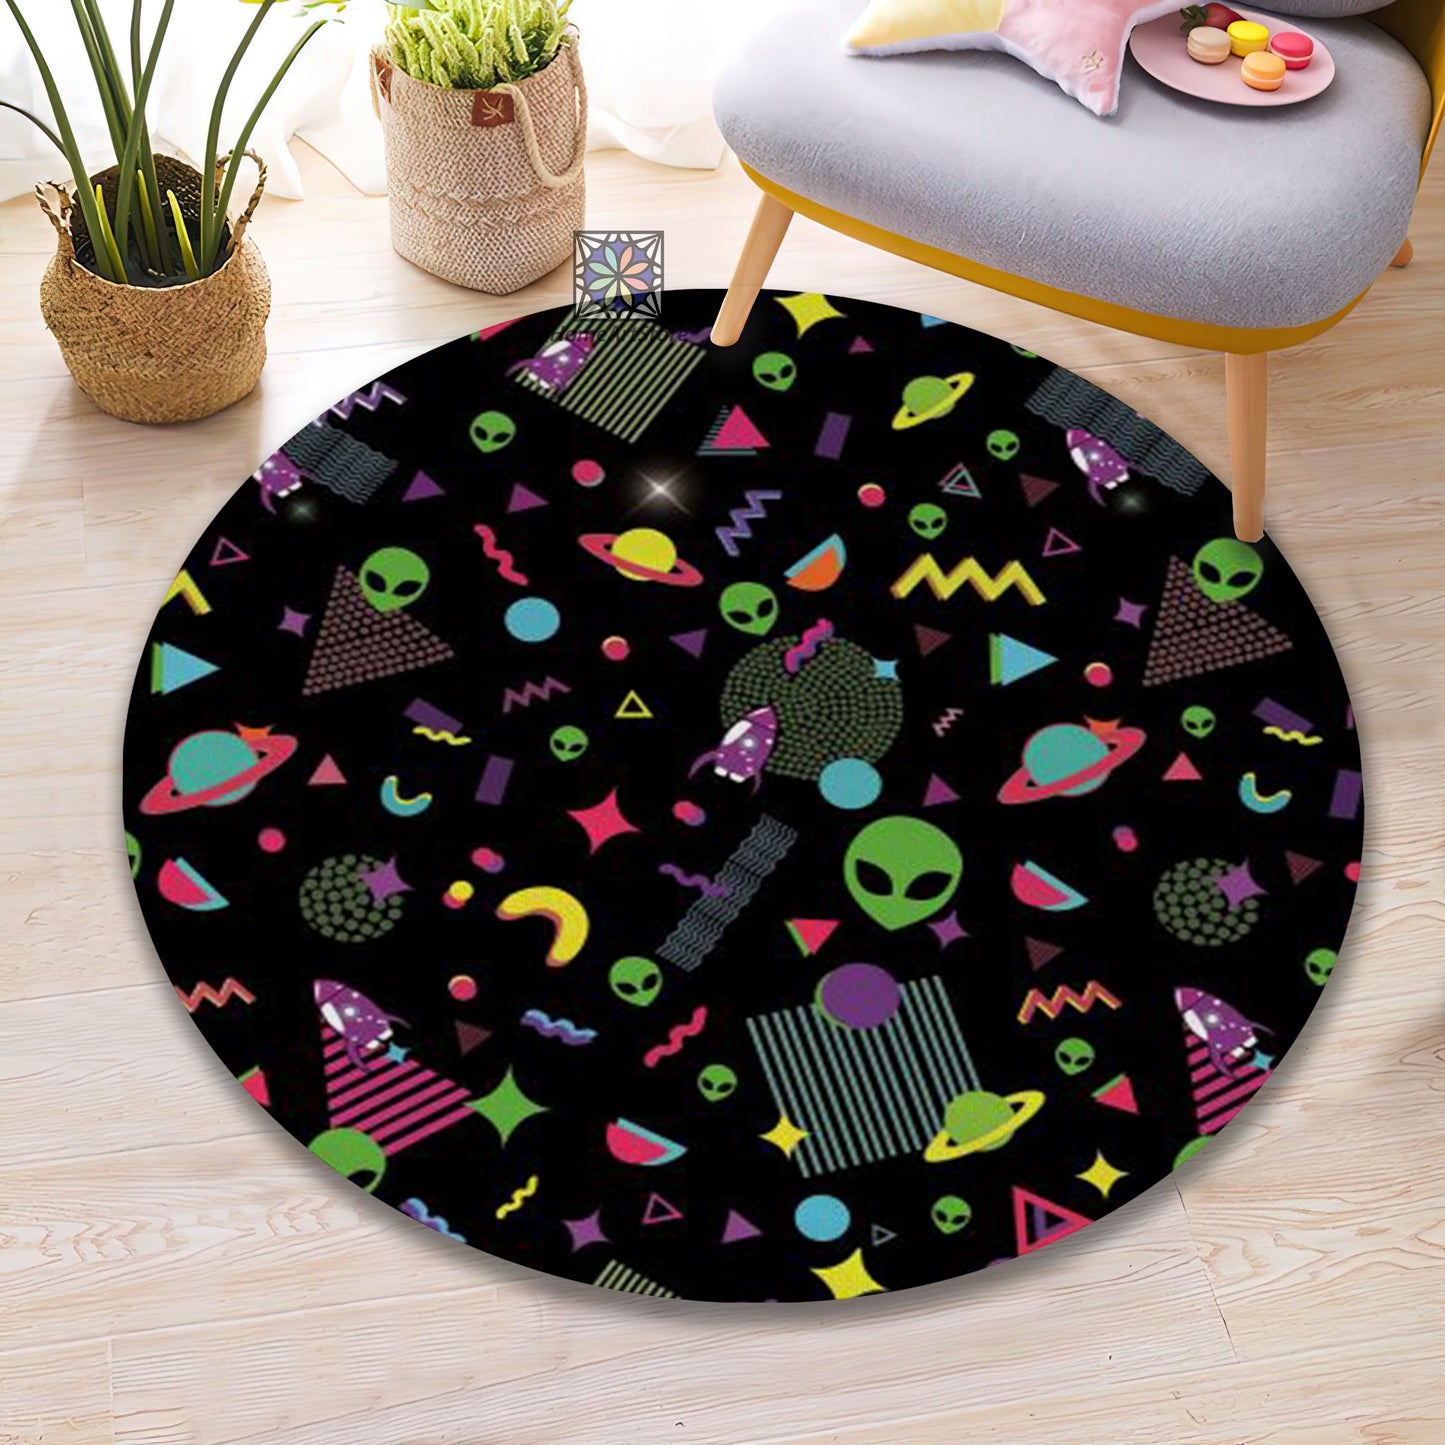 Alien Patterned Arcade Rug, Space Game Carpet, Game Room Decor, Gaming Chair Mat